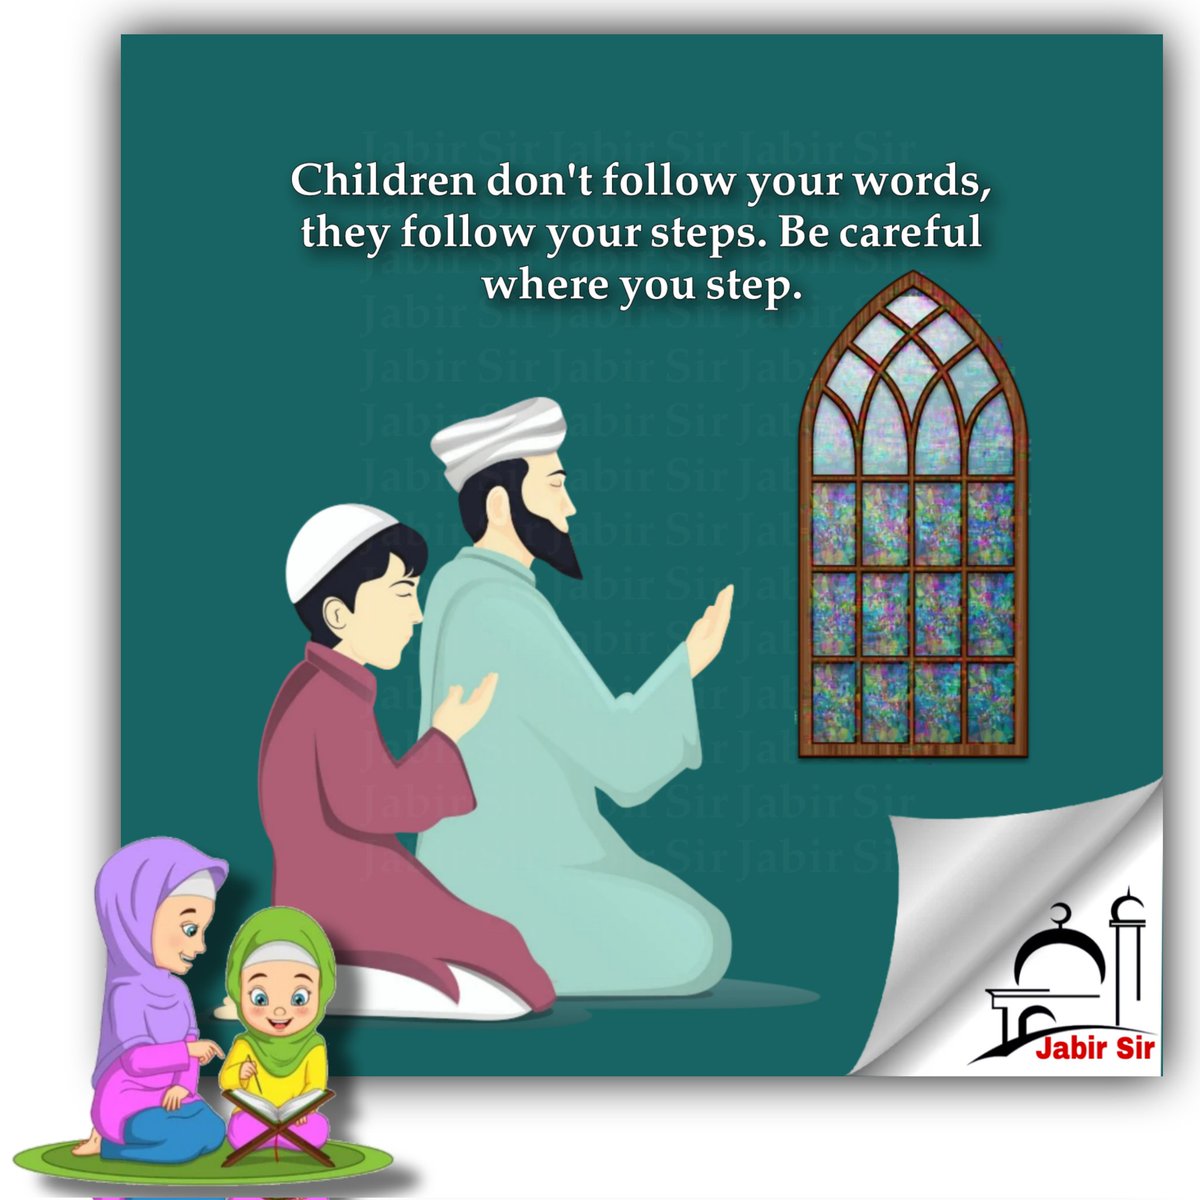 Children don't follow your words, they follow your steps. Be careful where you step.
#lifelessons 
#islamquote